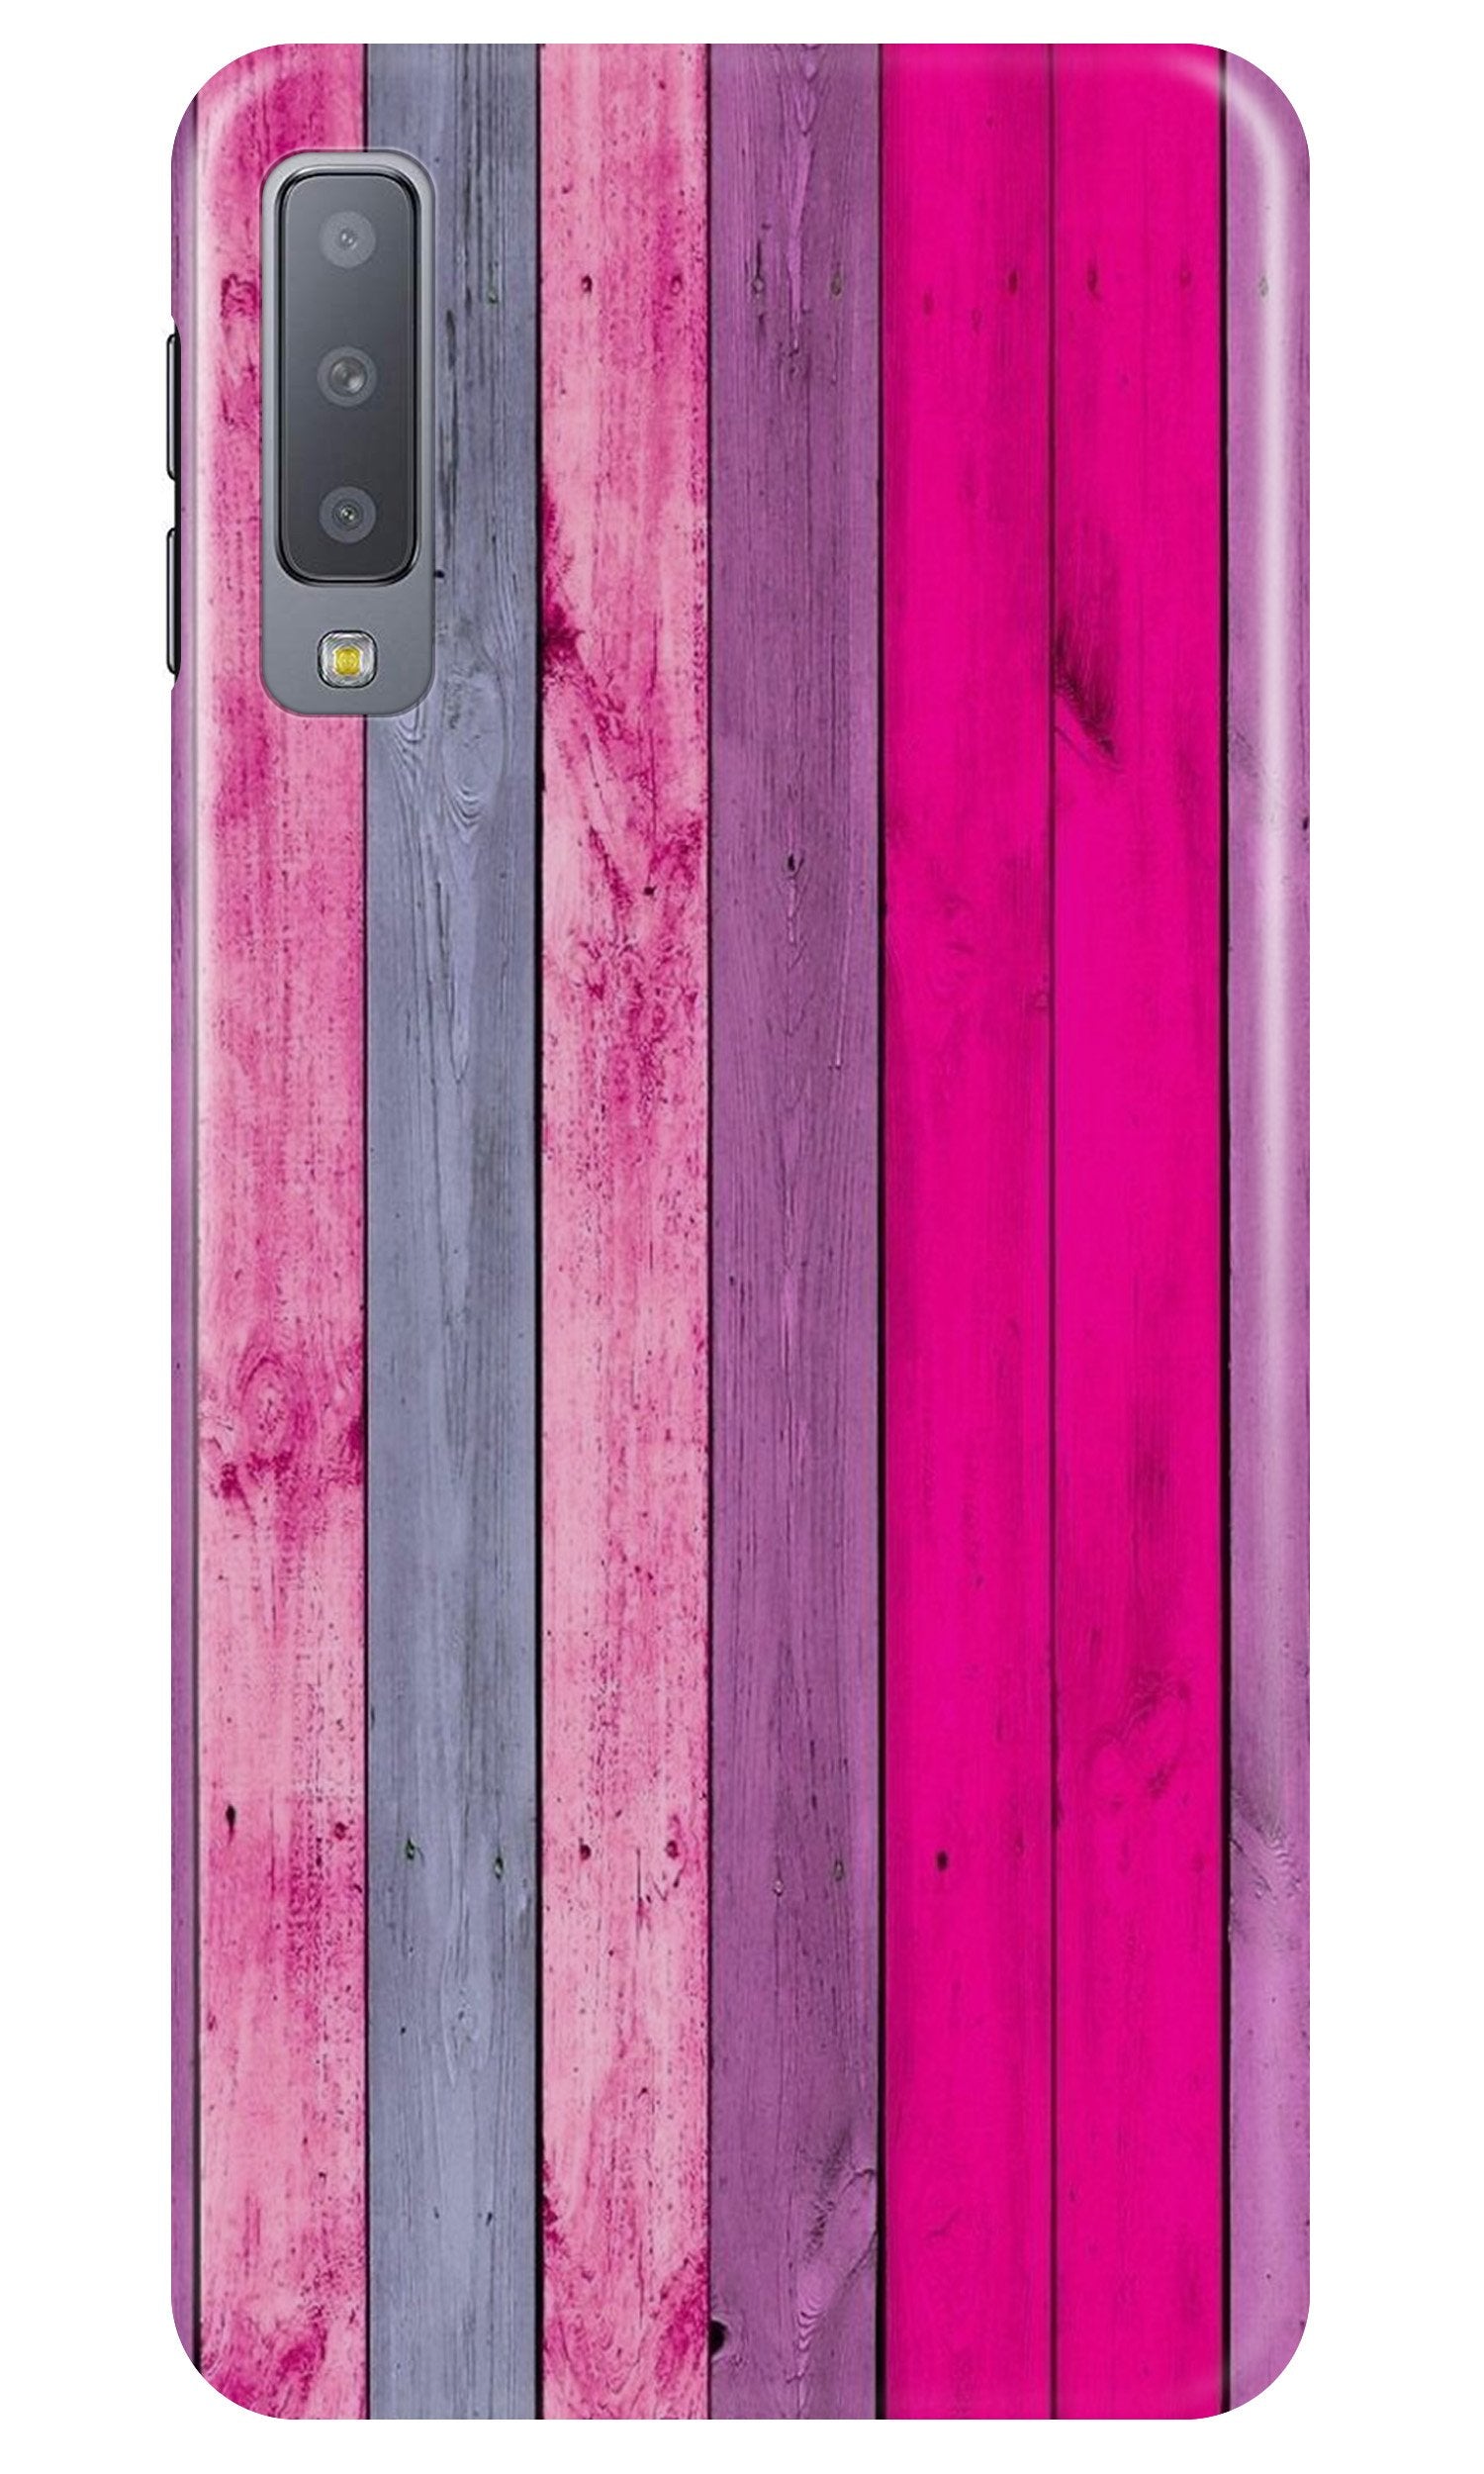 Wooden look Case for Samsung Galaxy A50s